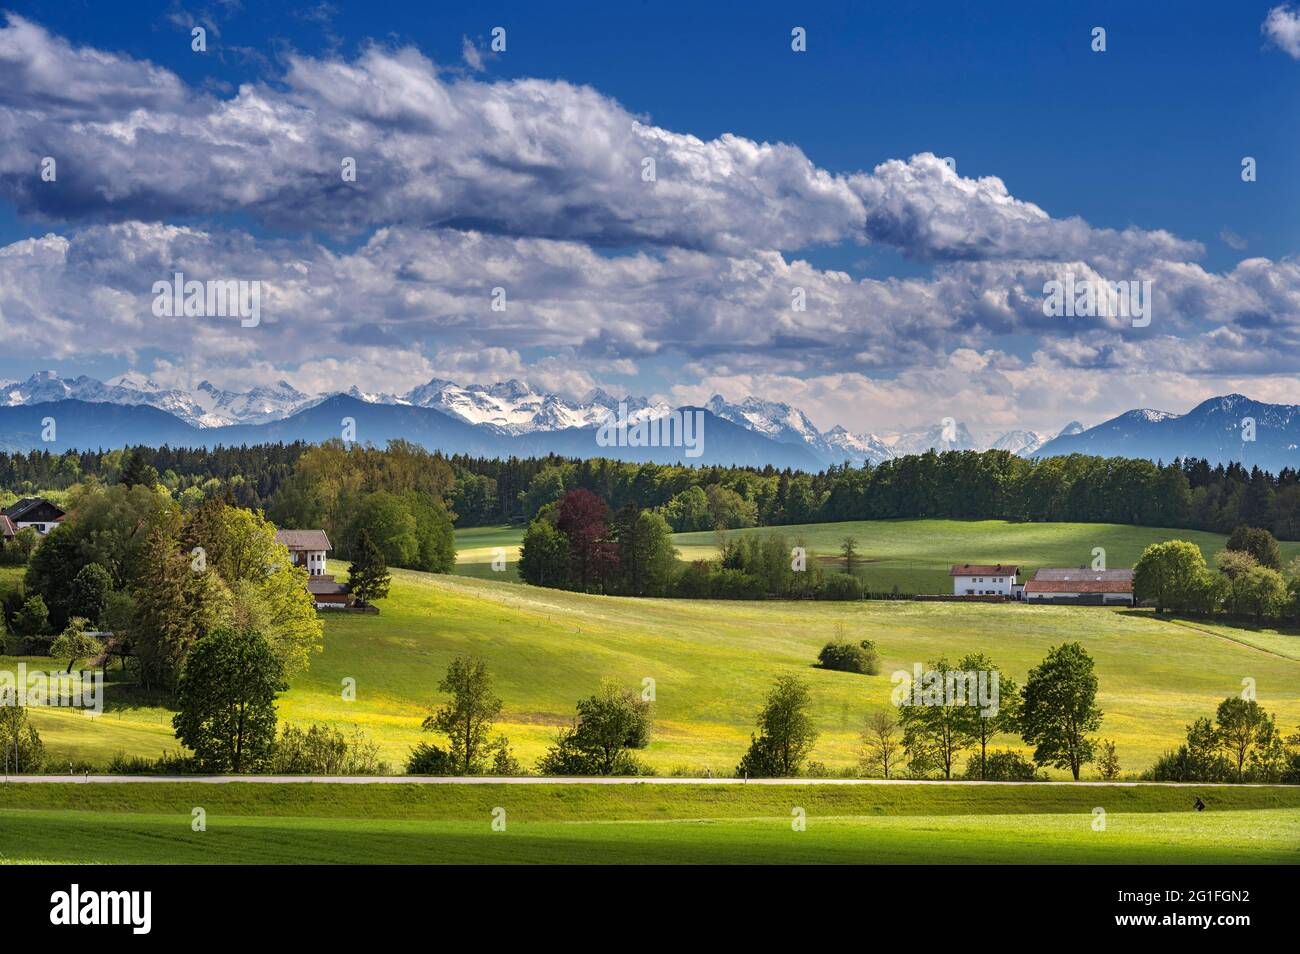 Springlike landscape in the foothills of the Alps with (cumulus) clouds, near Deining, Upper Bavaria, Bavaria, Germany Stock Photo